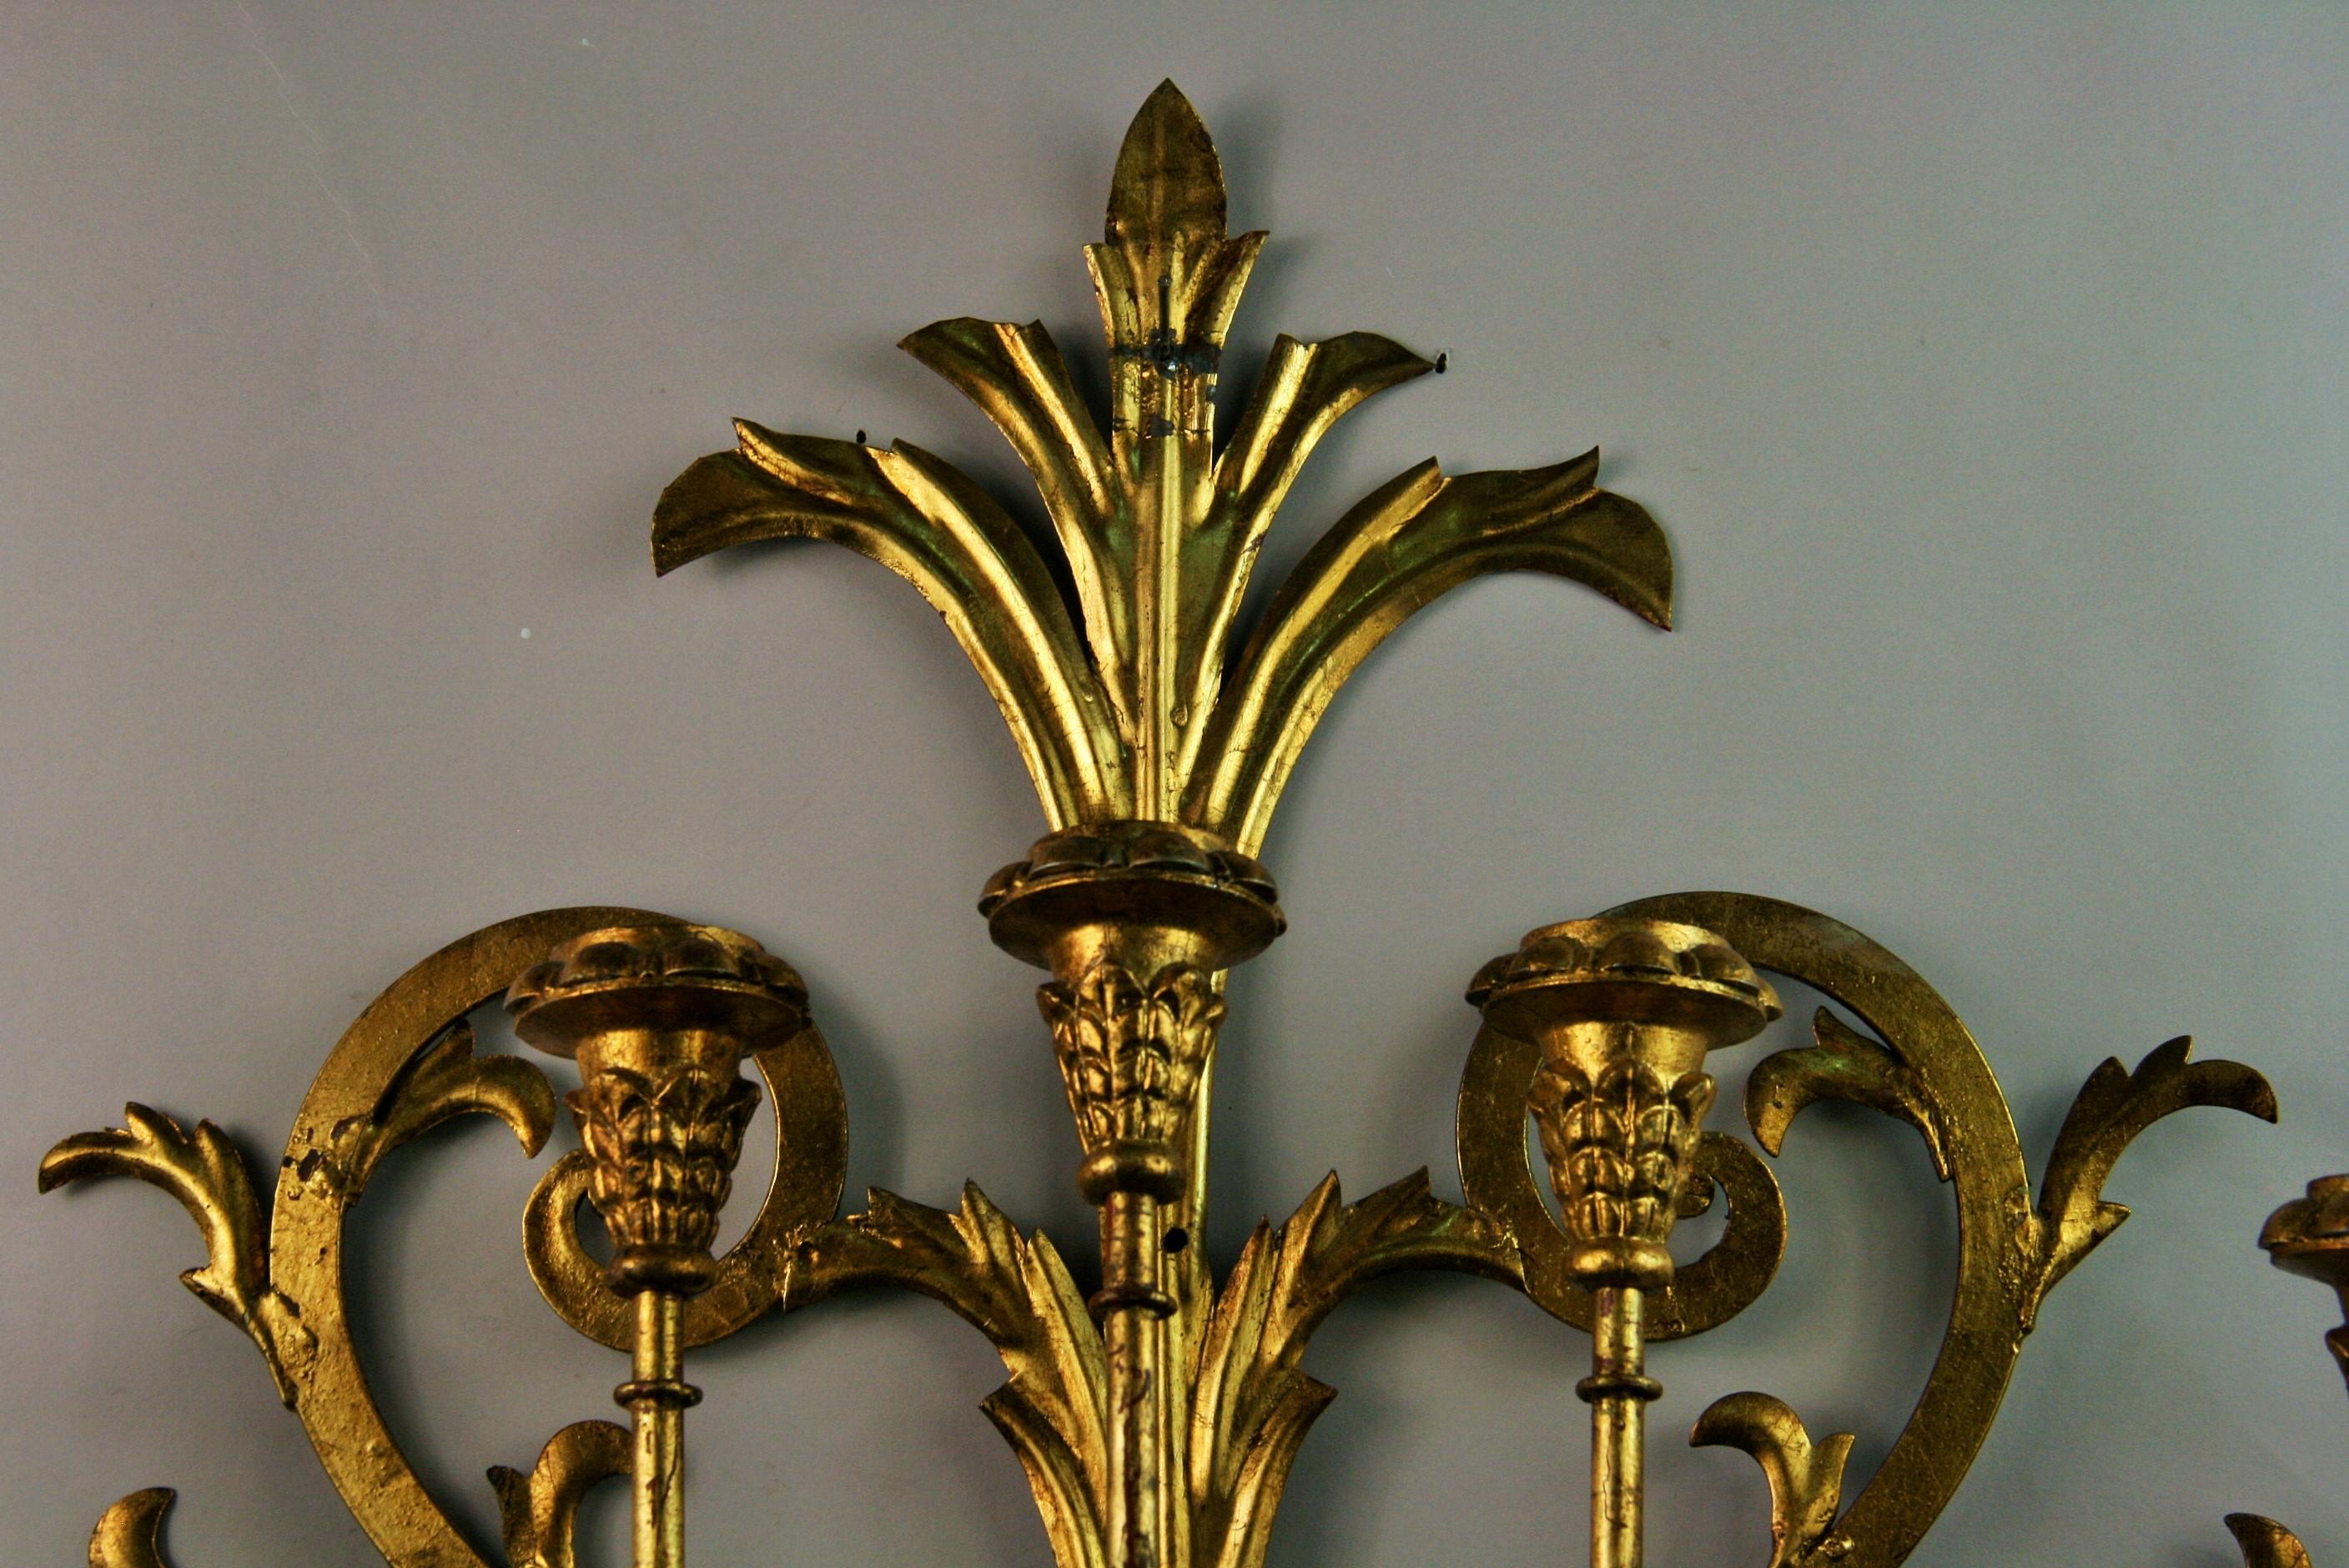 Mid-20th Century Italian 7 Lite Wall Candle Sconce or Sculpture For Sale